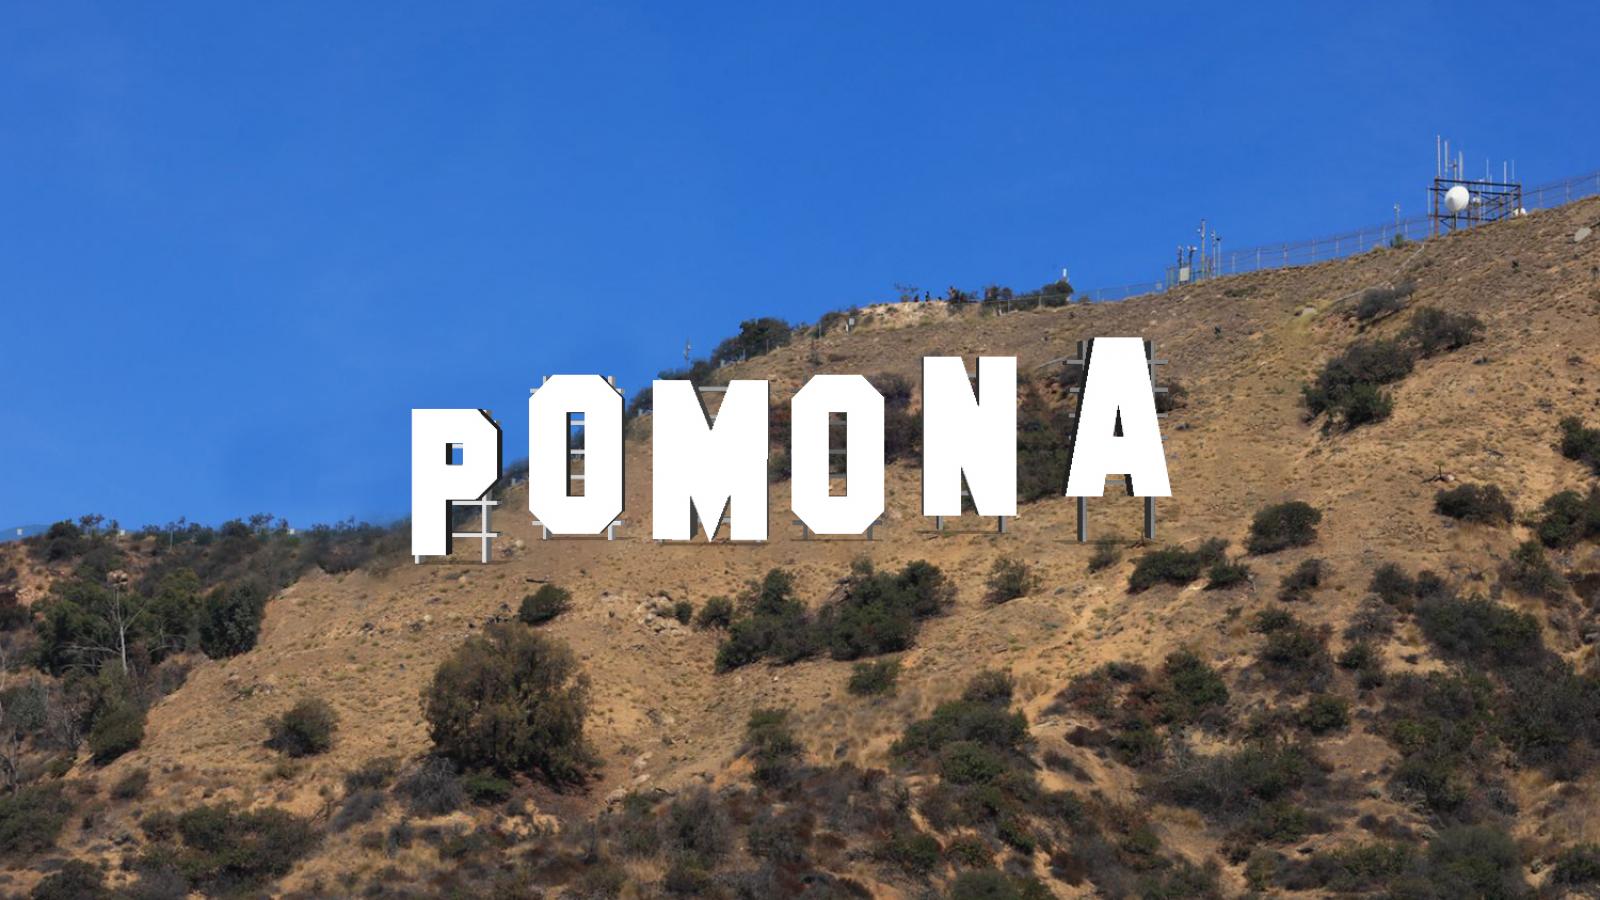 Pomona is written as if it were the Hollywood sign